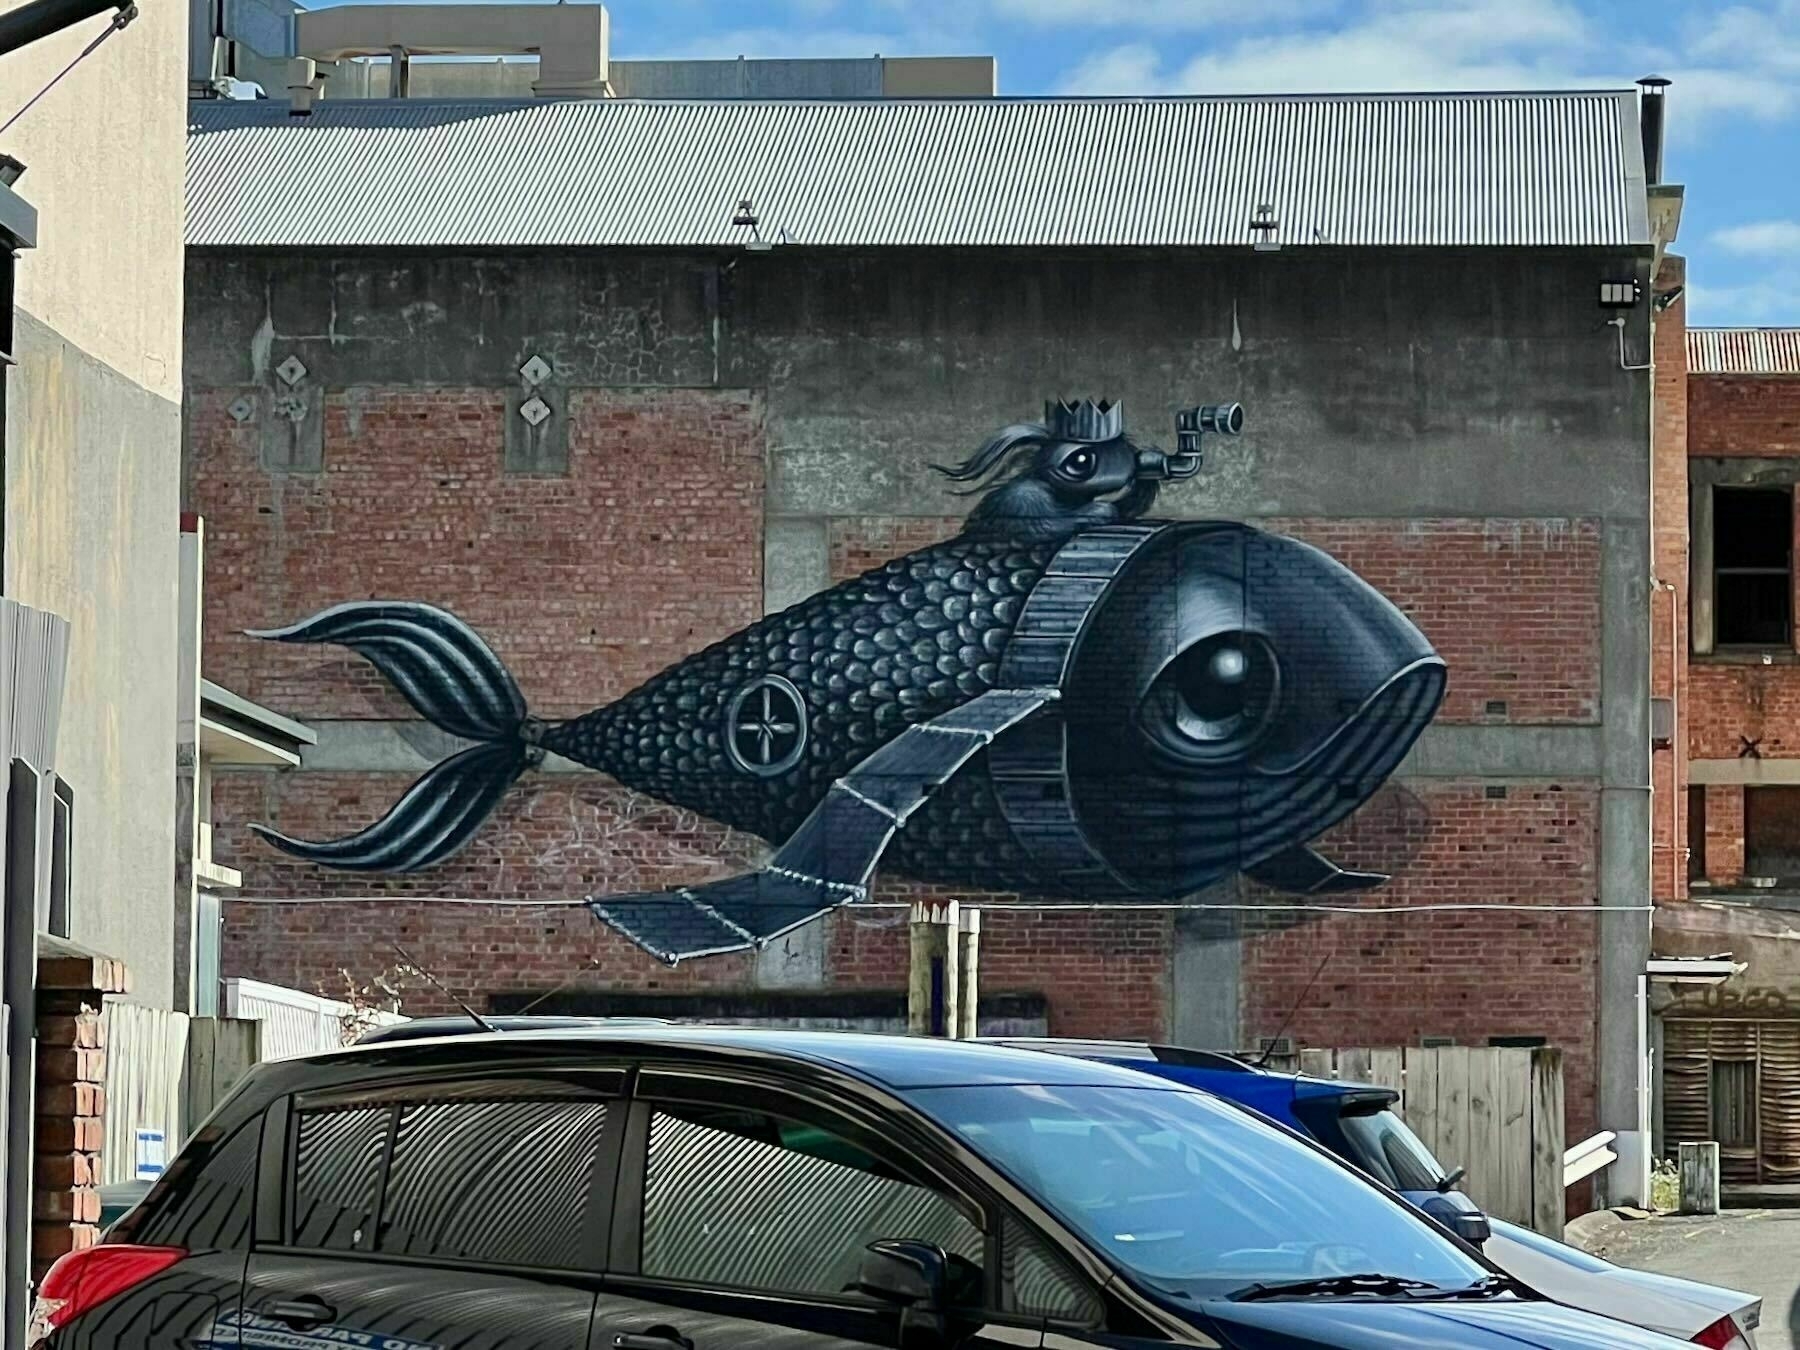 Mural depicting a black mechanical fish with a smaller fish on its back and using a periscope. 